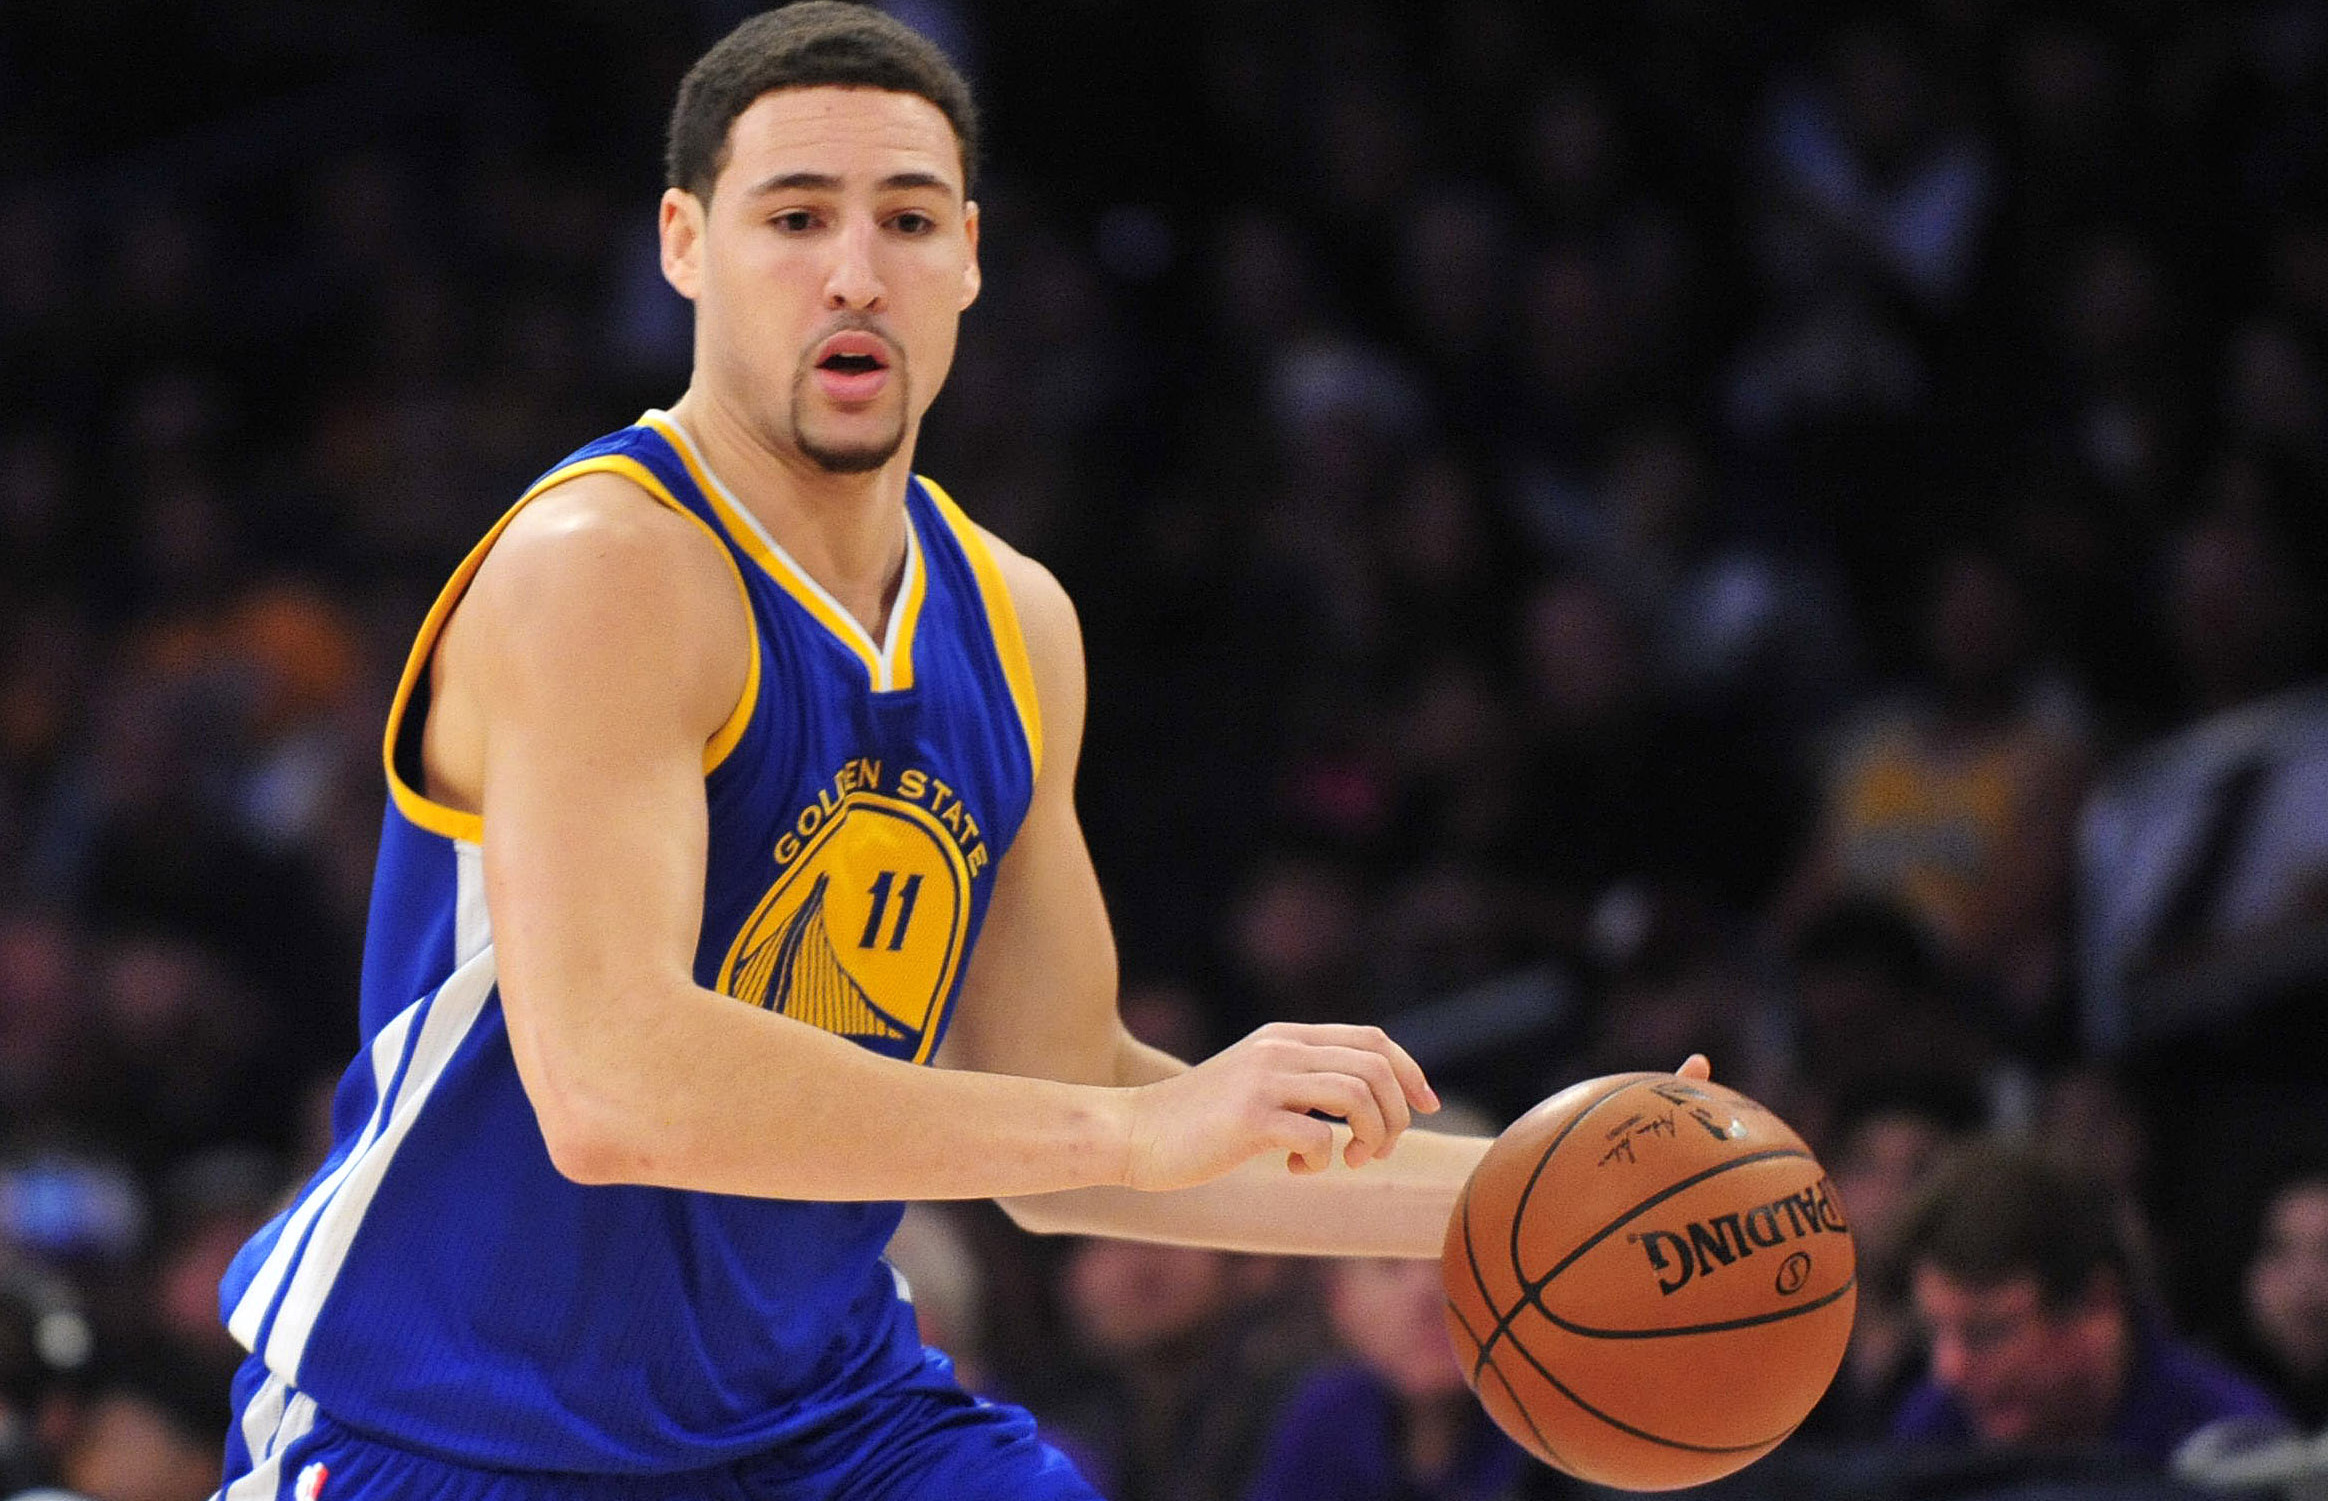 Klay Thompson's Fix for His Shooting Woes? Unearthing His Alter